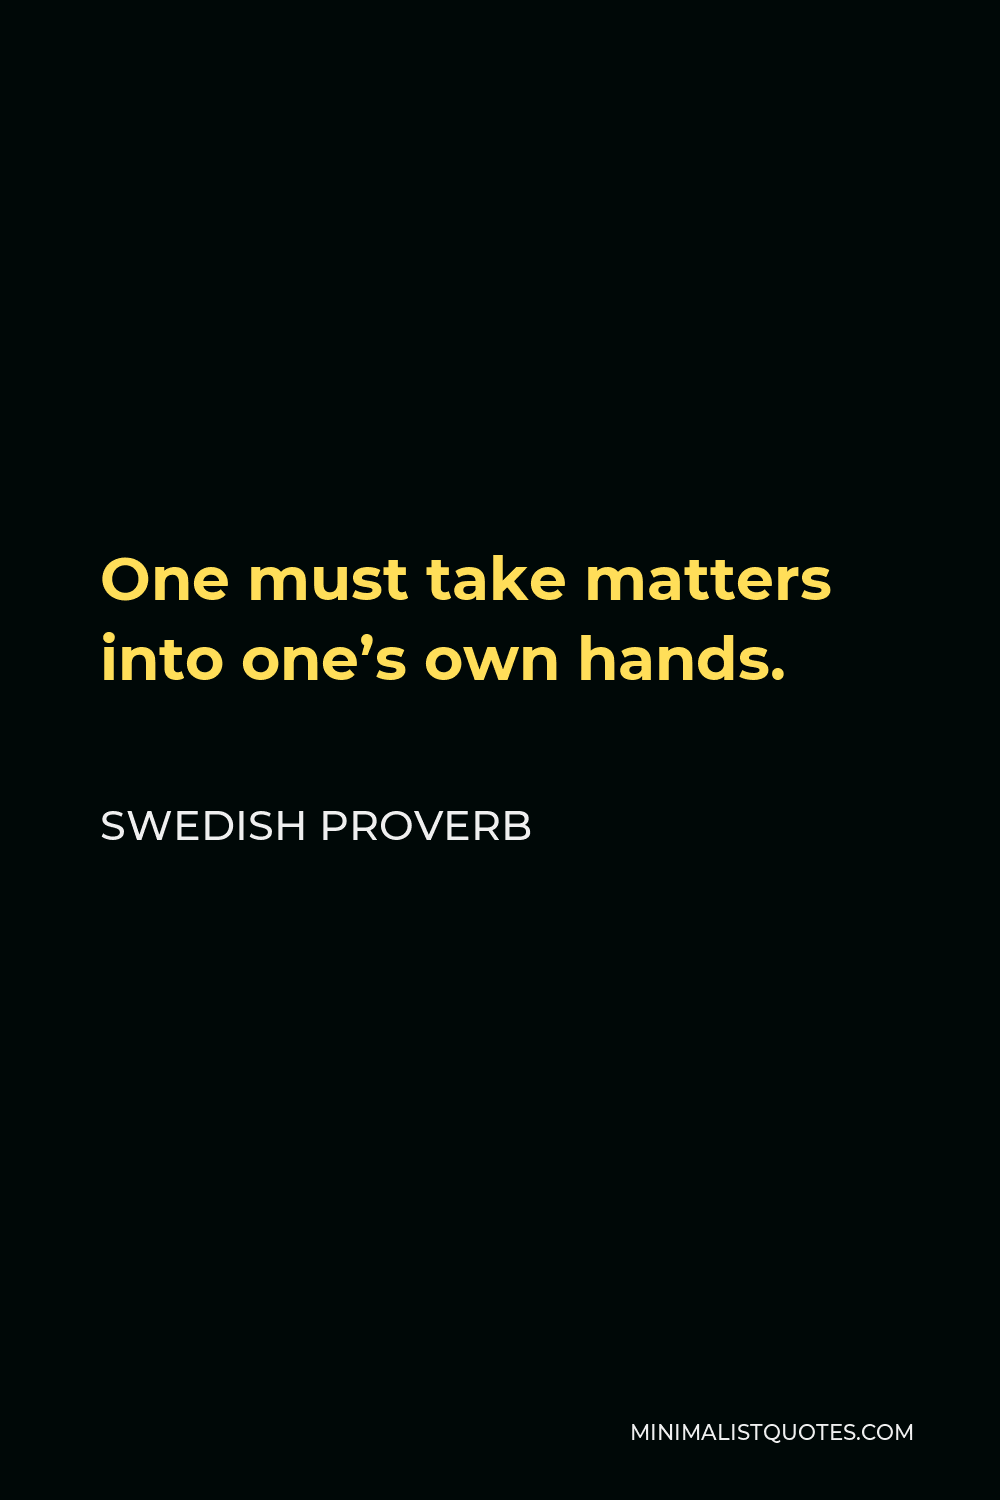 Swedish Proverb Quote - One must take matters into one’s own hands.